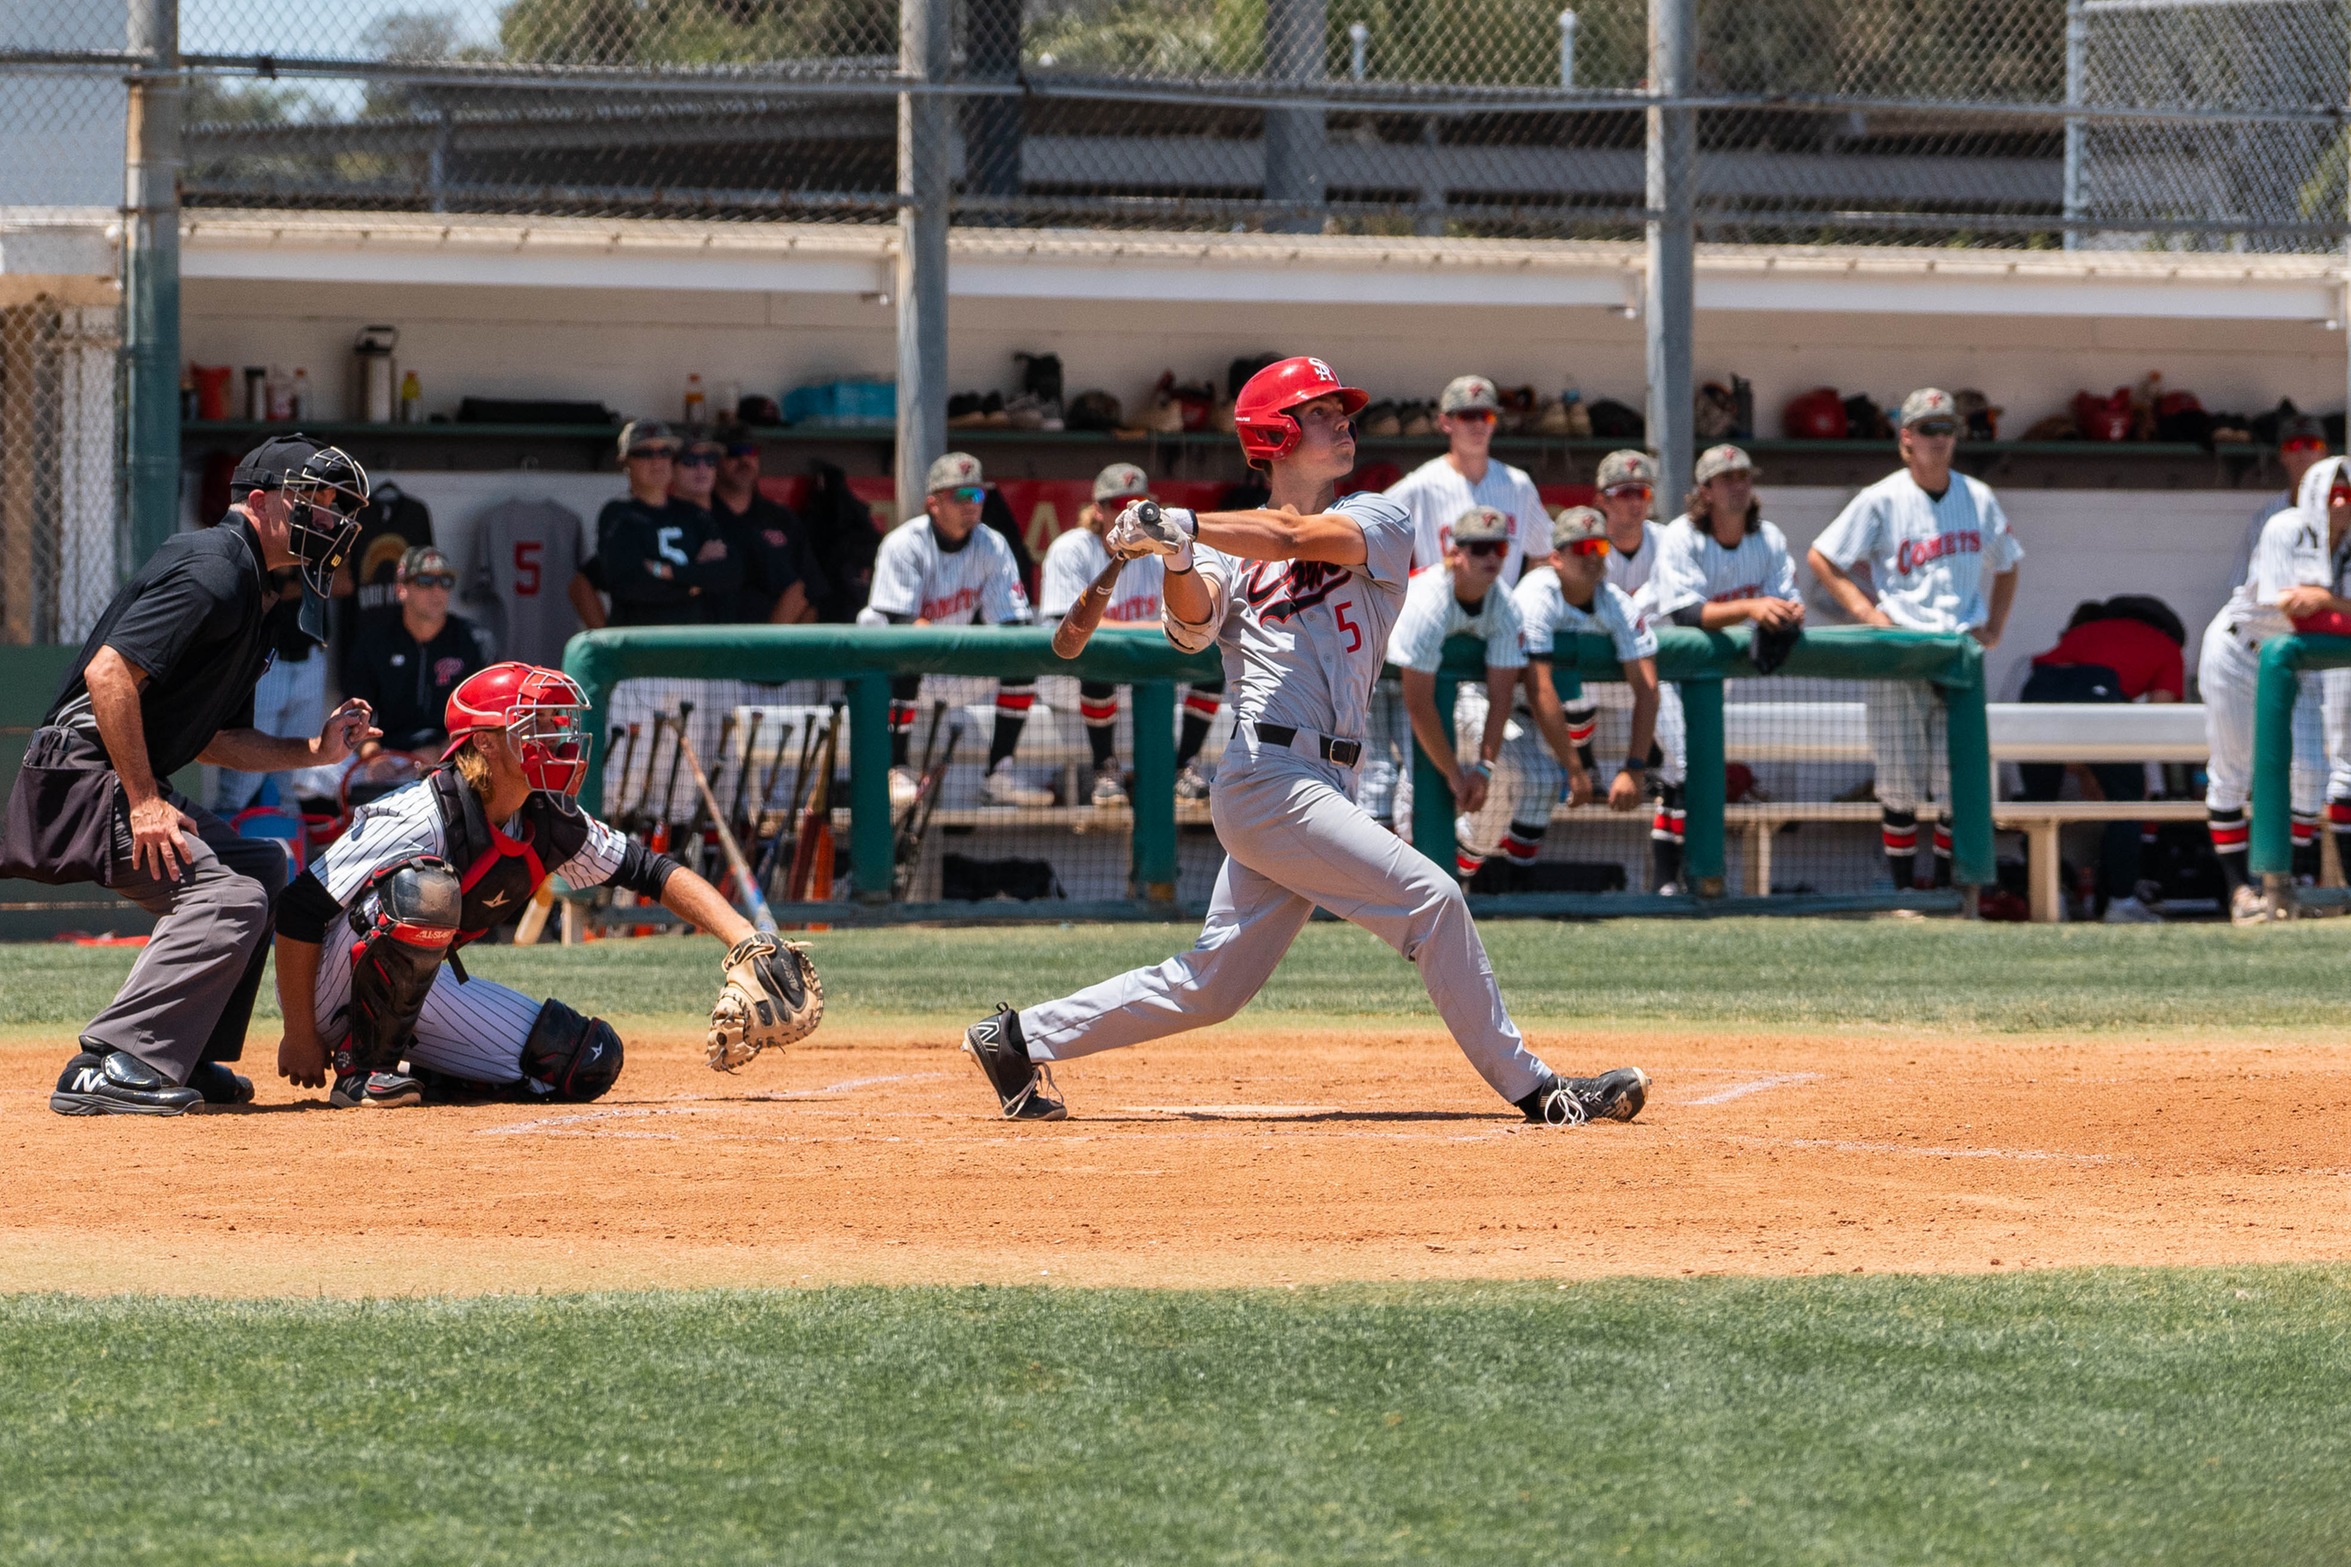 Dons Force Game 3 with 13-9 Win Over No. 5 Palomar